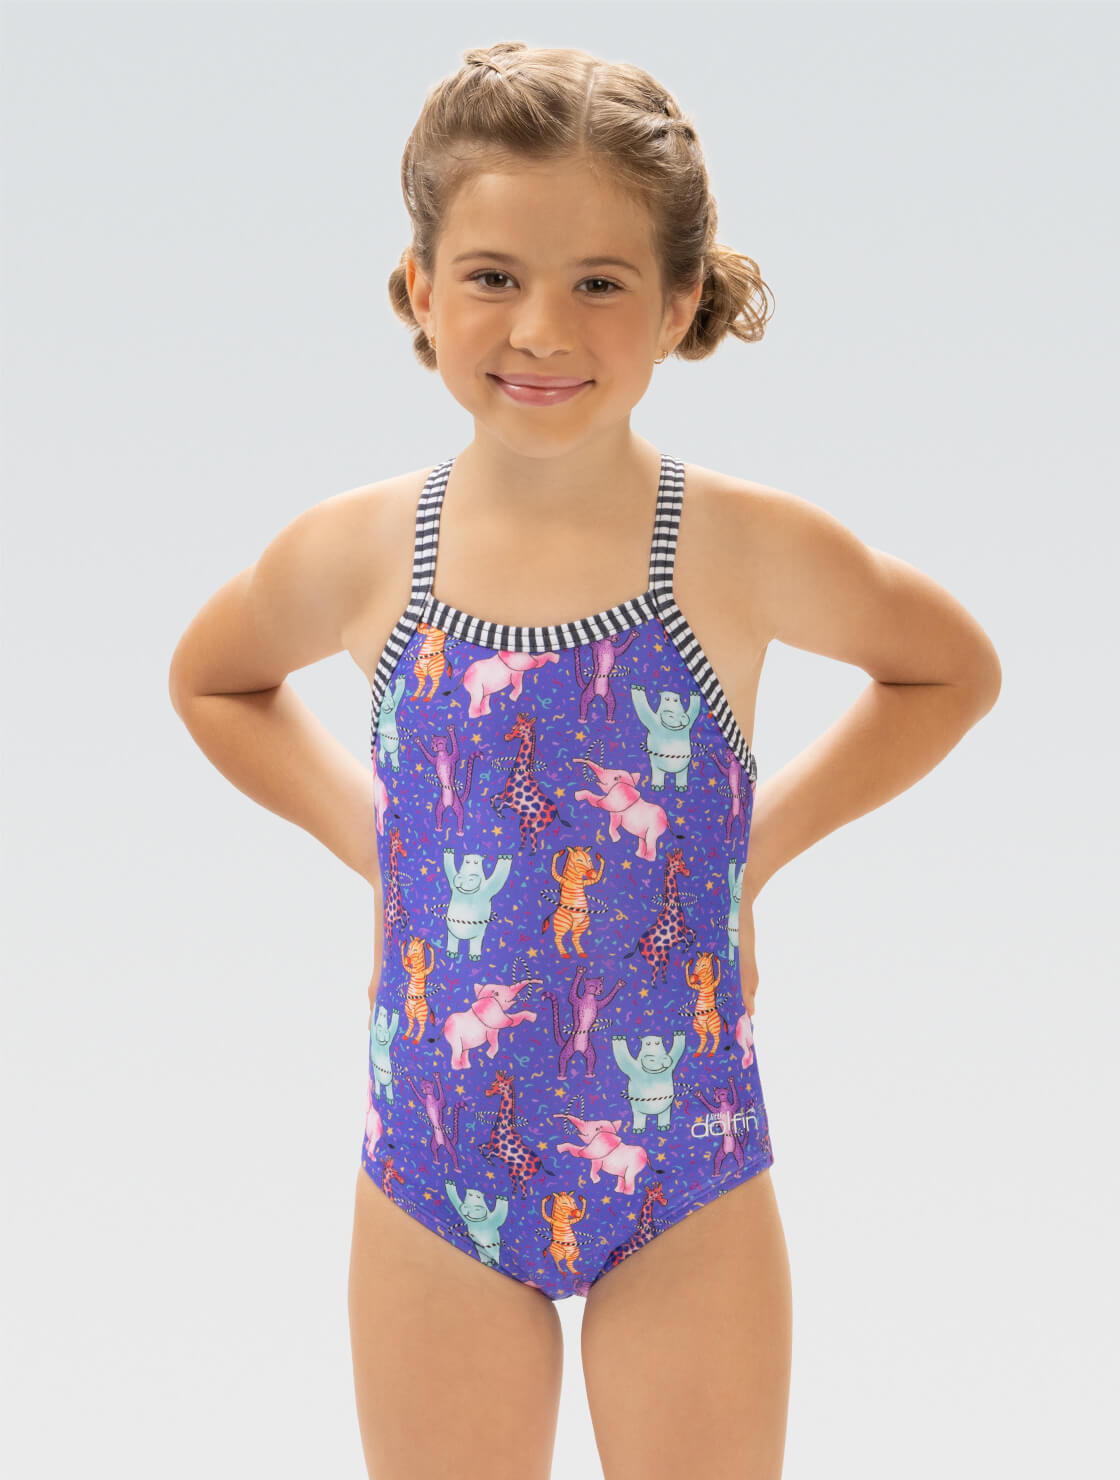 Little Dolfin Girls' Scoop Front Straight Back One Piece: Playtime